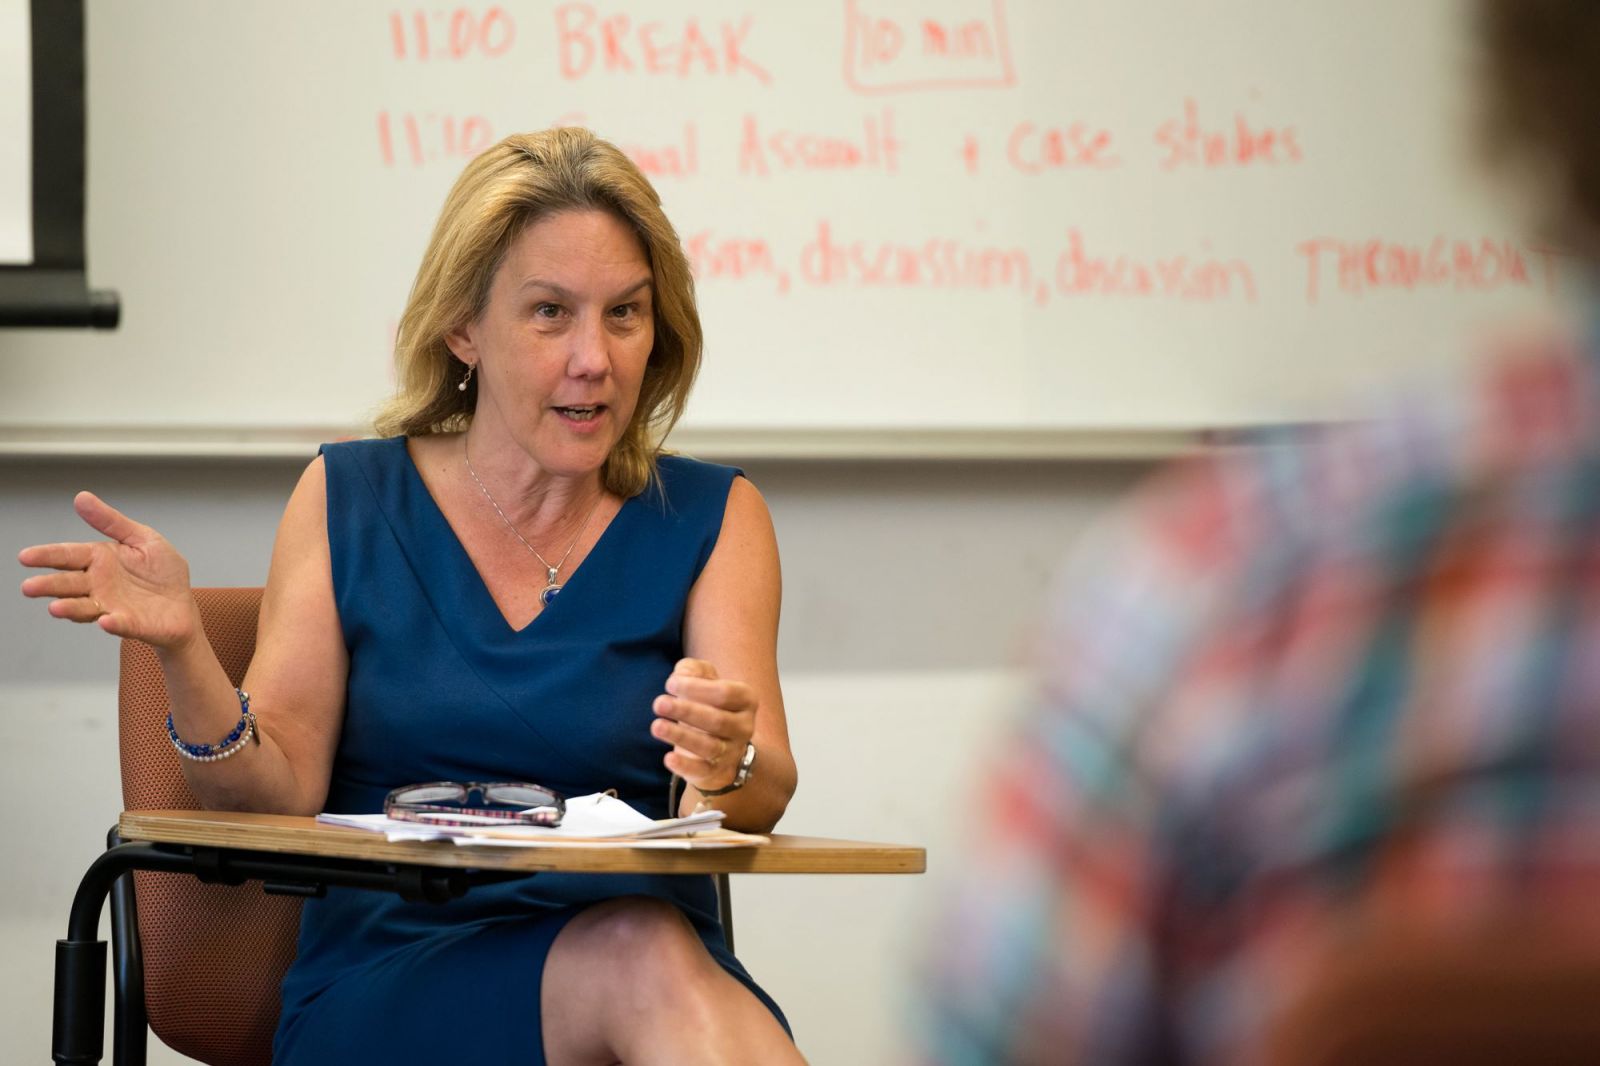 Summer Institute Trains Faculty, Inspires Action AAUP